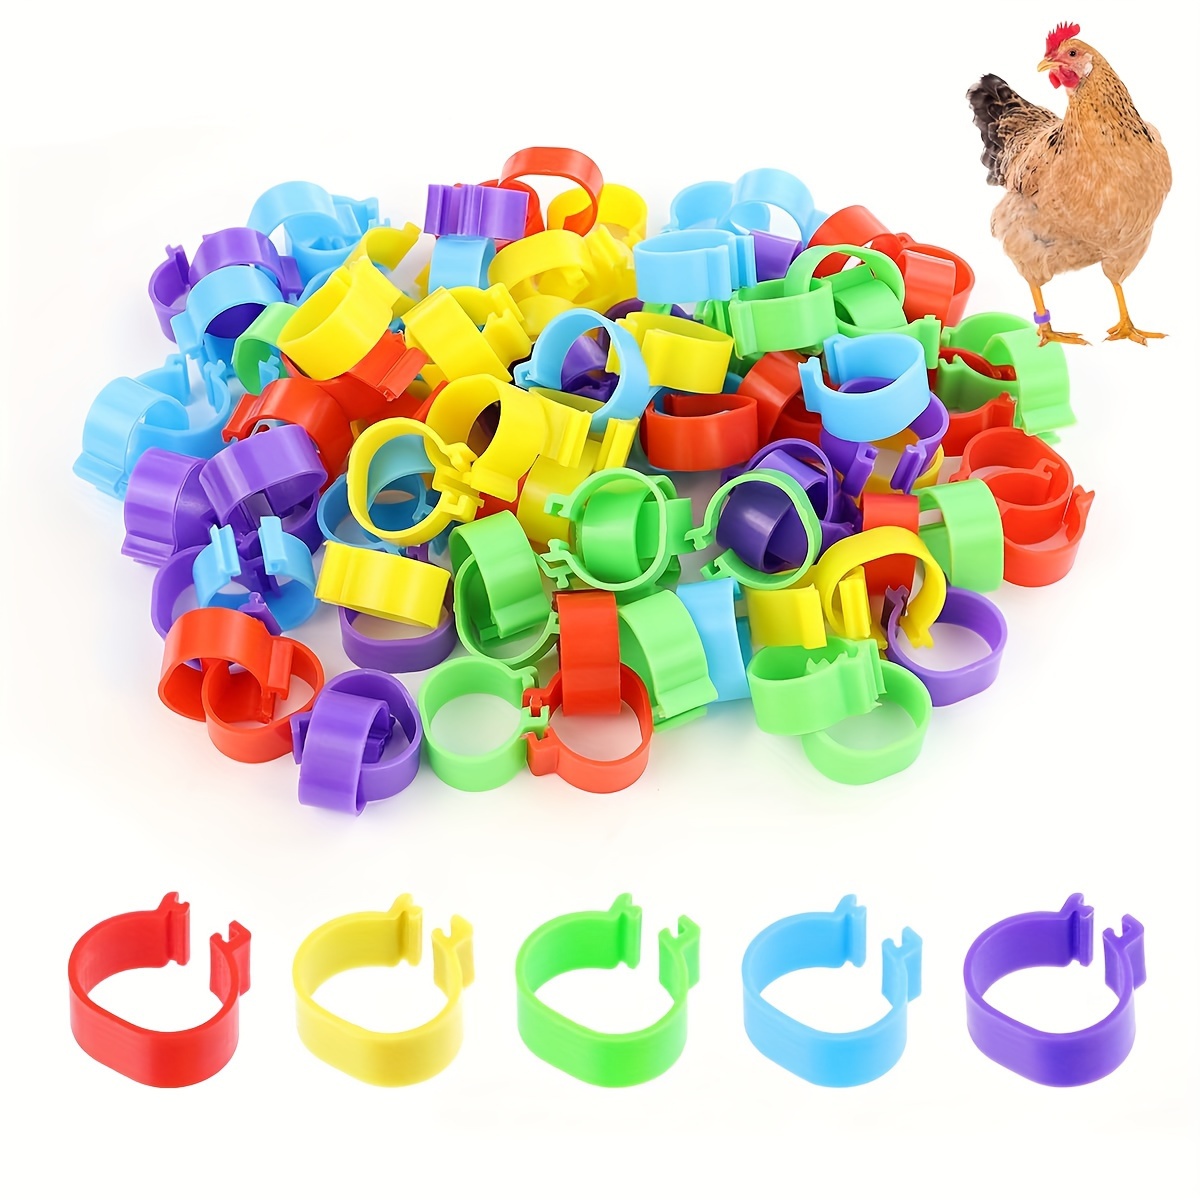 

100pcs Chicken Identification Band 5 Color Chicken Leg Rings 16mm Poultry Foot Rings Leg Bands Clip-on Rings For Poultry Identification